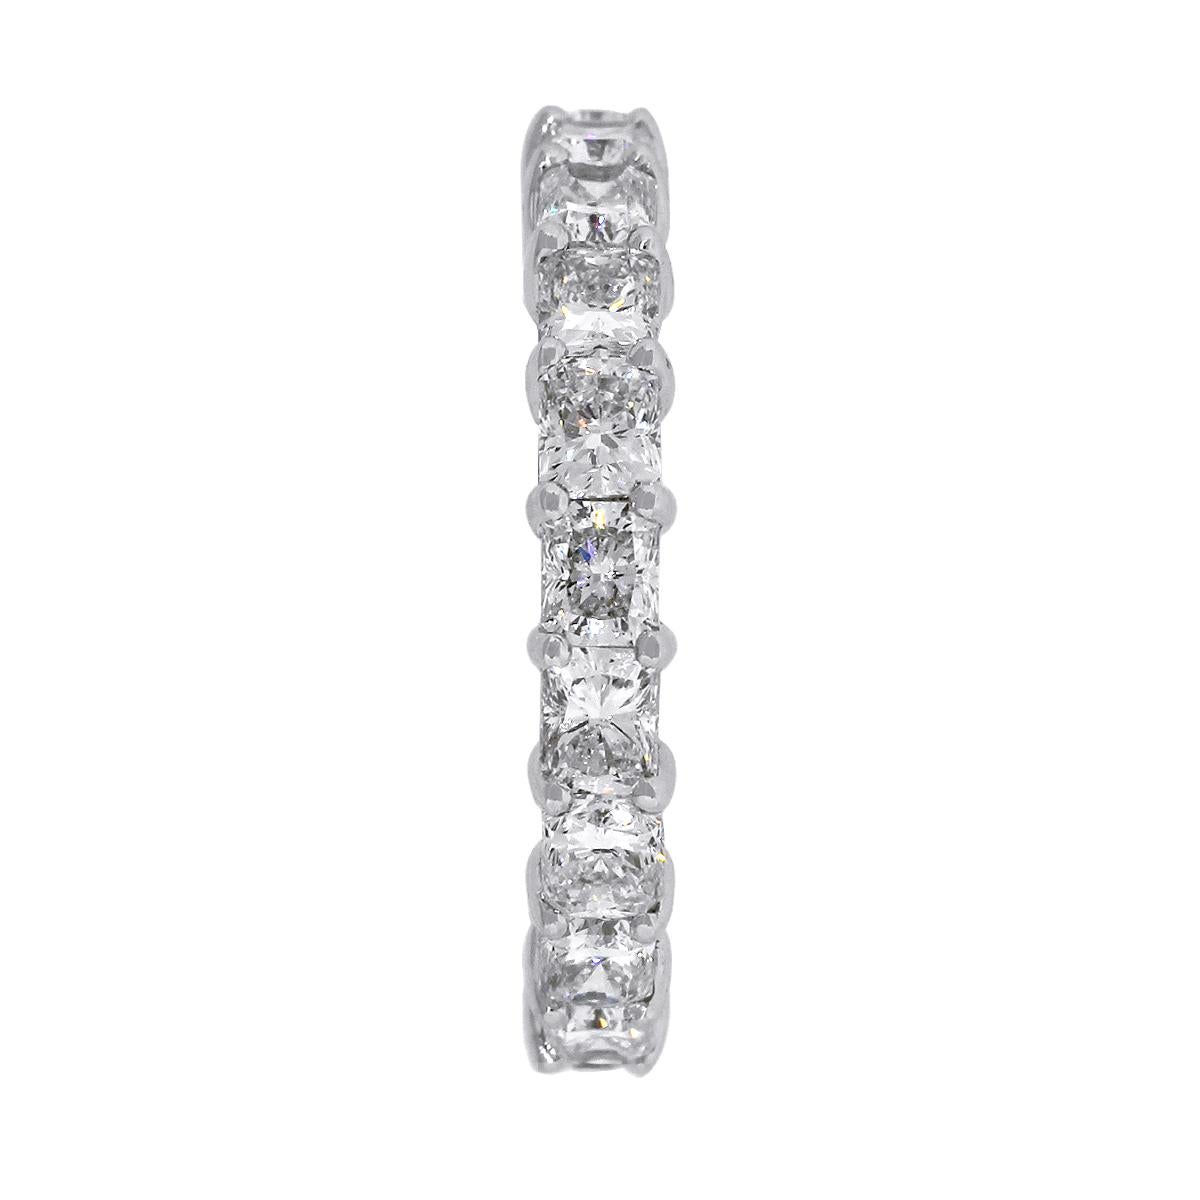 Material: 18k White Gold
Diamond Details: Approximately 2.92ctw of Radiant Cut Diamonds. Diamonds are G/H in color and VS in clarity
Size: 6
Total Weight: 2.6g (1.7 dwt)
Measurements: 0.85″ x 0.12″ x 0.85″
SKU: A30311887